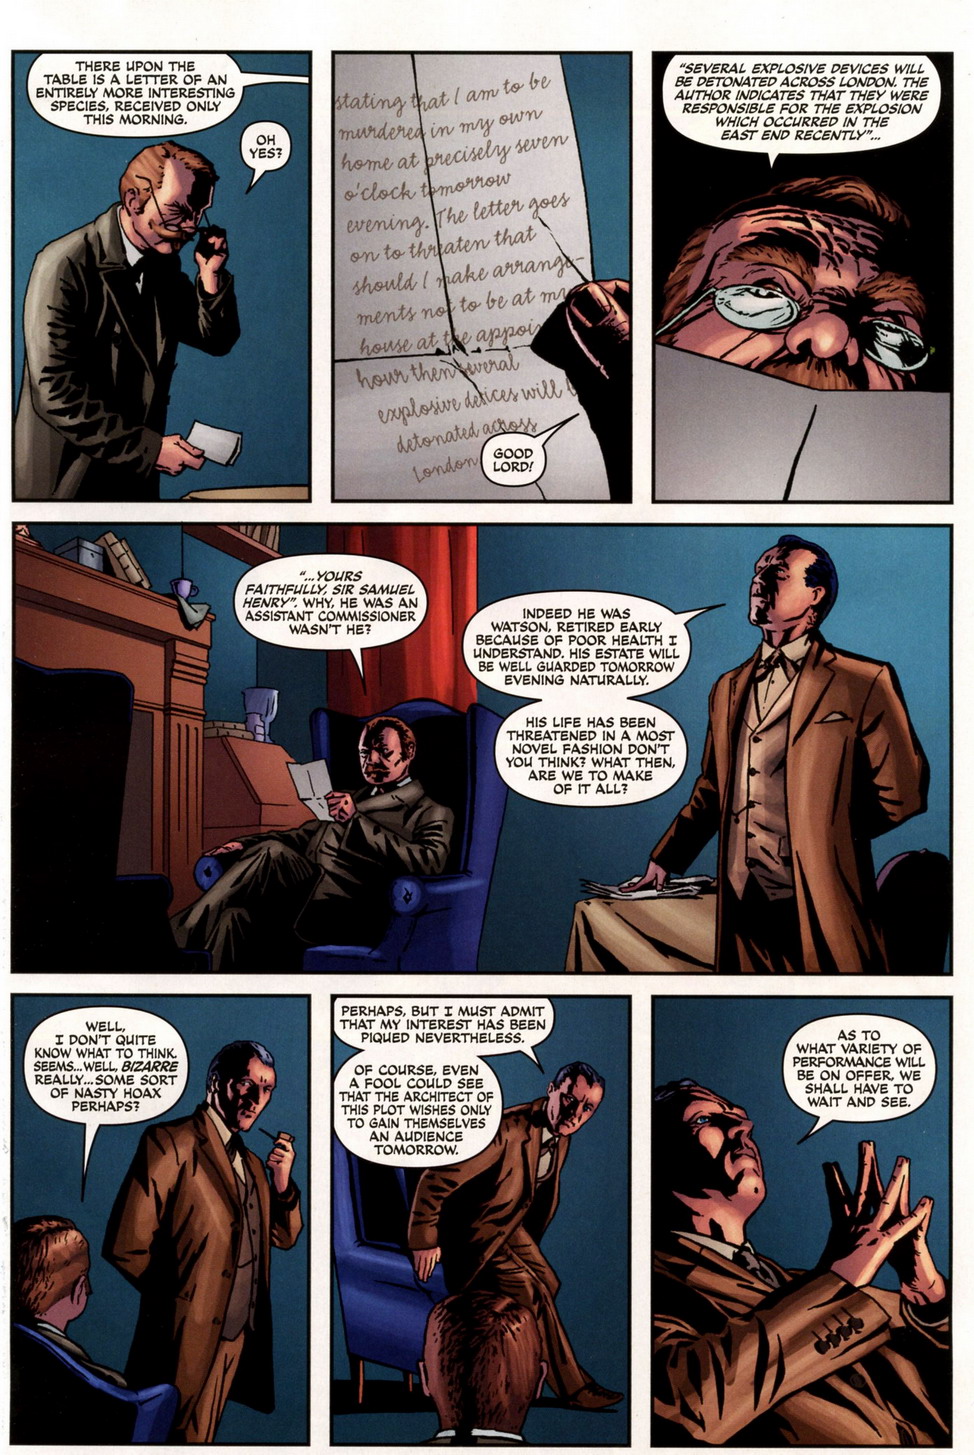 Sherlock Holmes (2009) issue 1 - Page 9